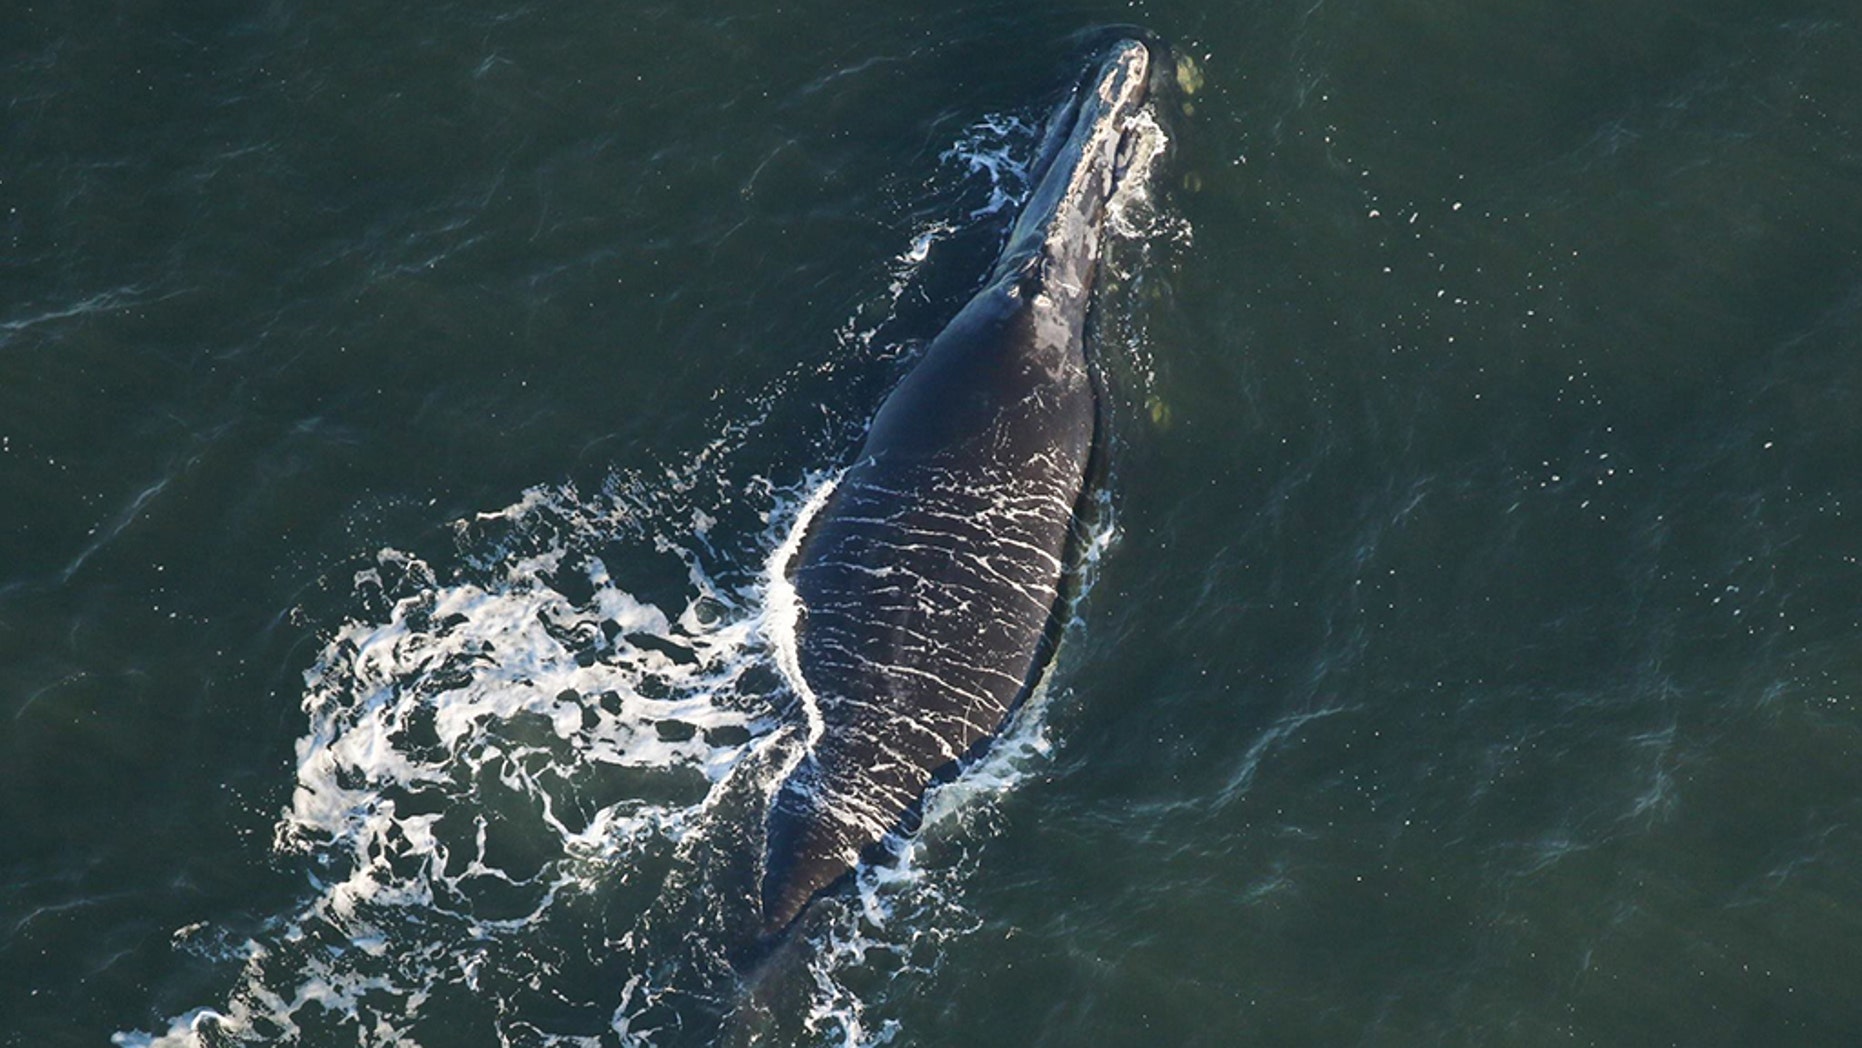 First right whale calf of season seen by endangered-species observers, Florida wildlife officials say